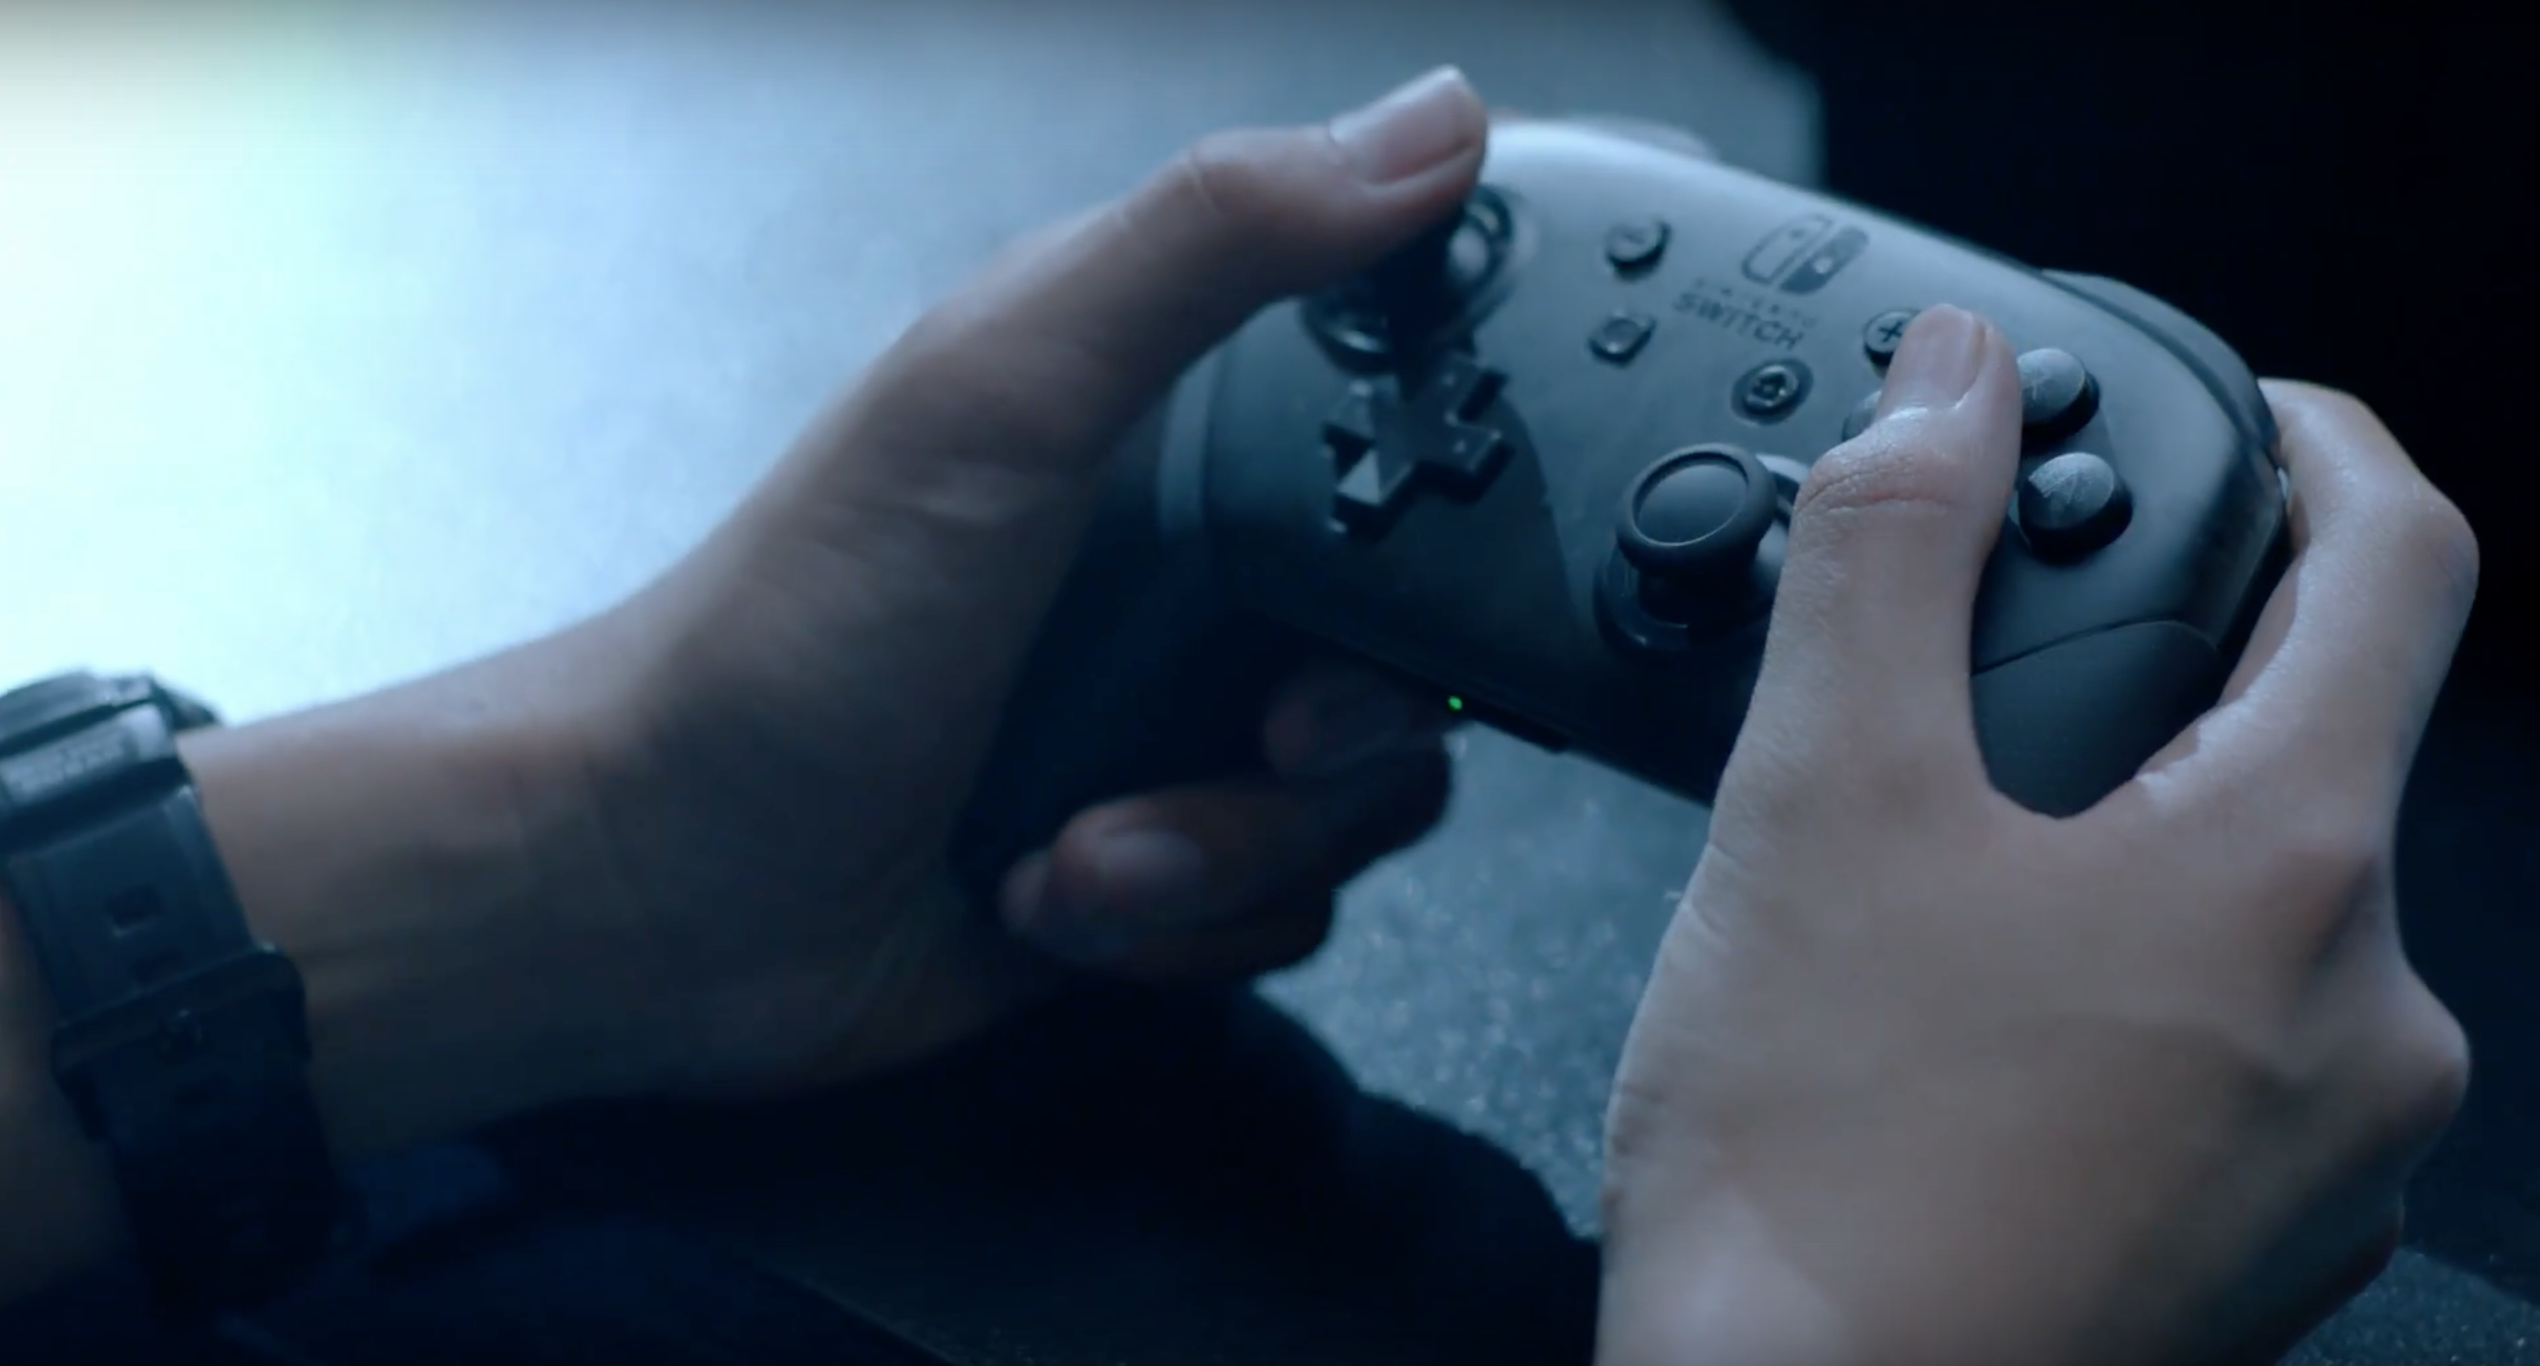 How to Connect a Nintendo Switch Pro Controller to Your PC